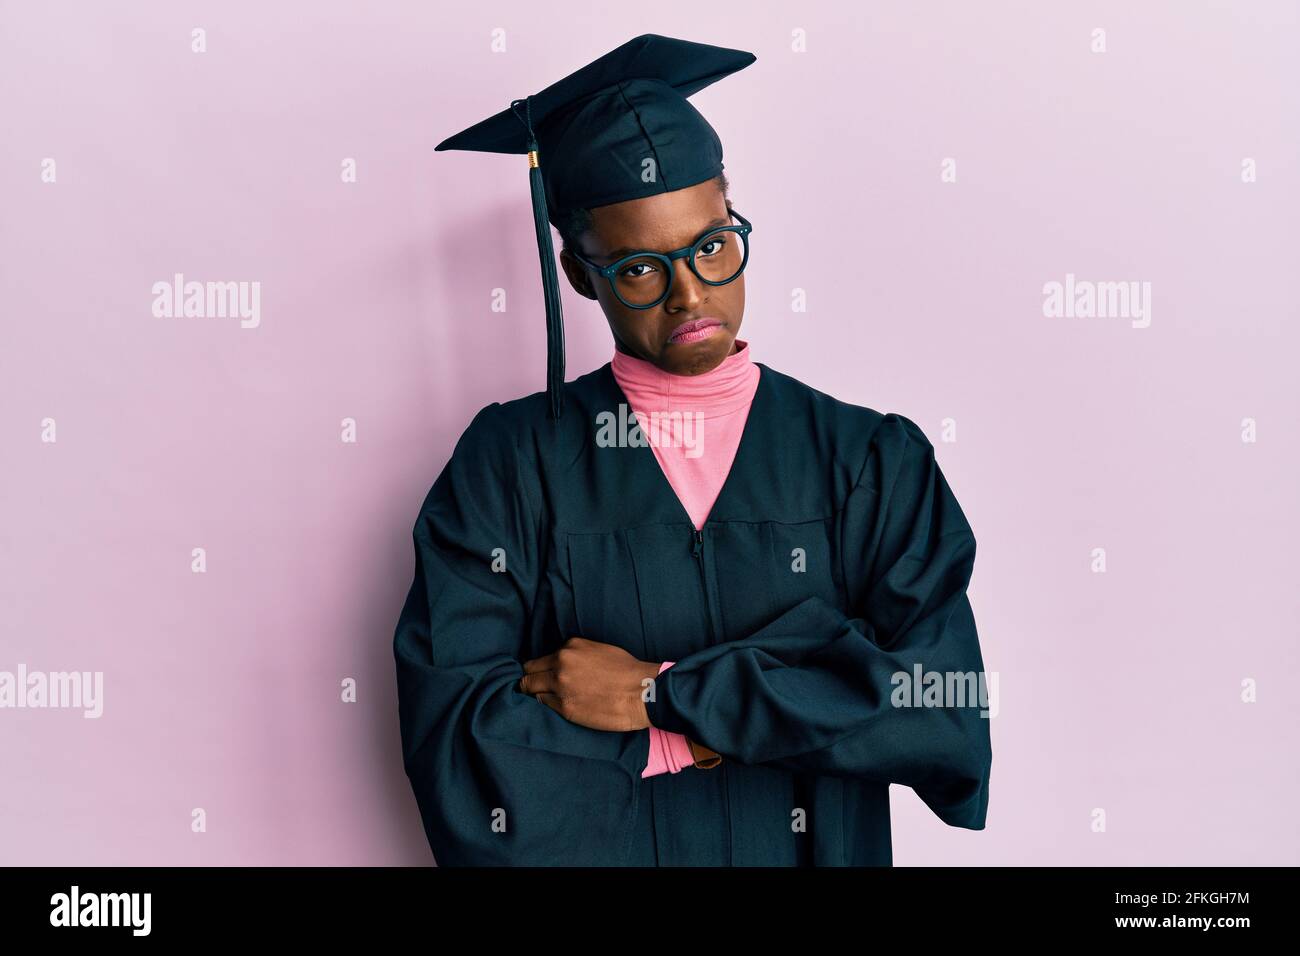 Young african american girl wearing graduation cap and ceremony robe skeptic and nervous, disapproving expression on face with crossed arms. negative Stock Photo